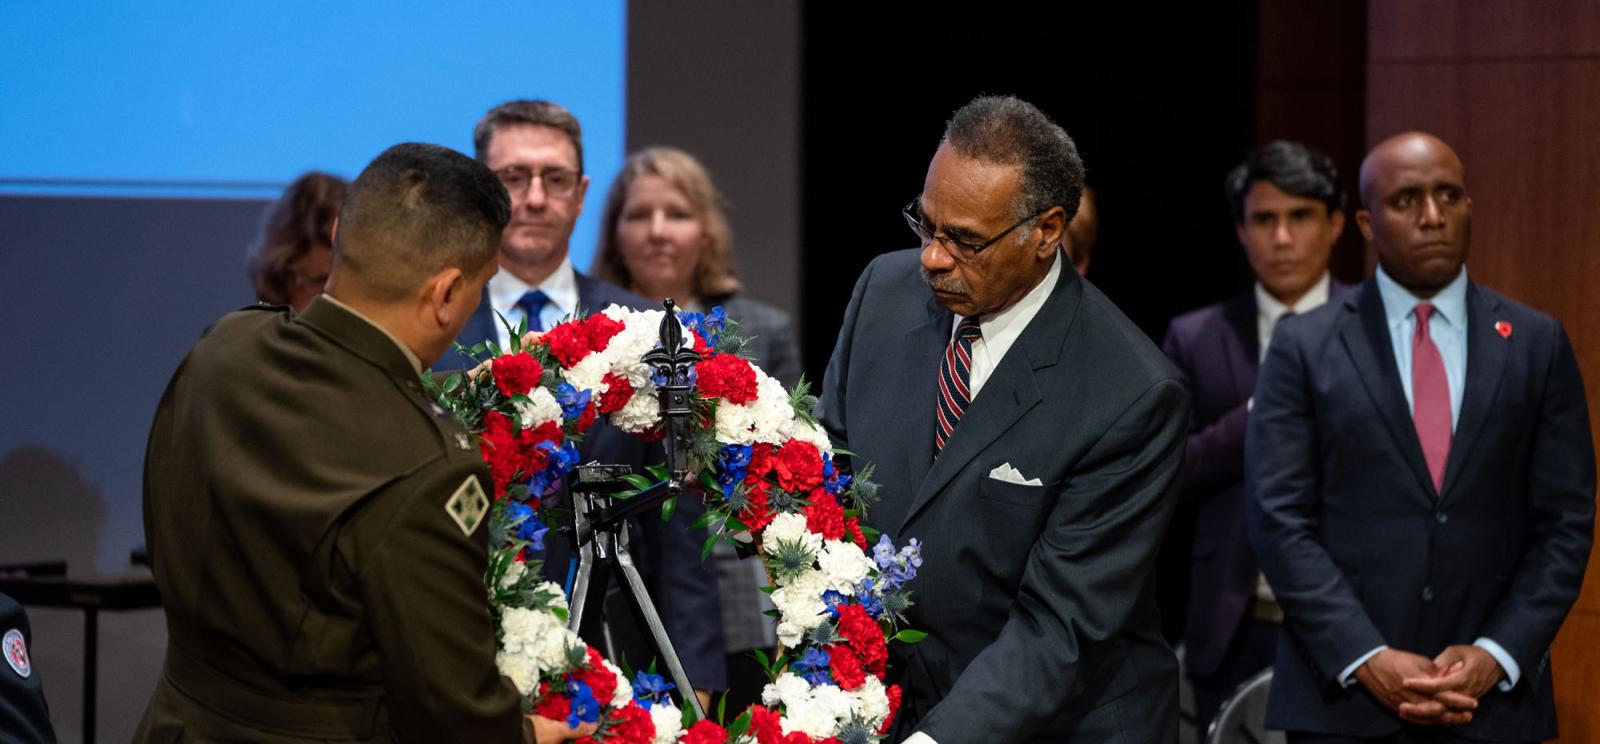 Modern photograph of a group of people wearing suits standing on a stage. In the foreground, an older Black man in a suit and a white man with a buzzcut wearing a military uniform place a large flower wreath on a stand.